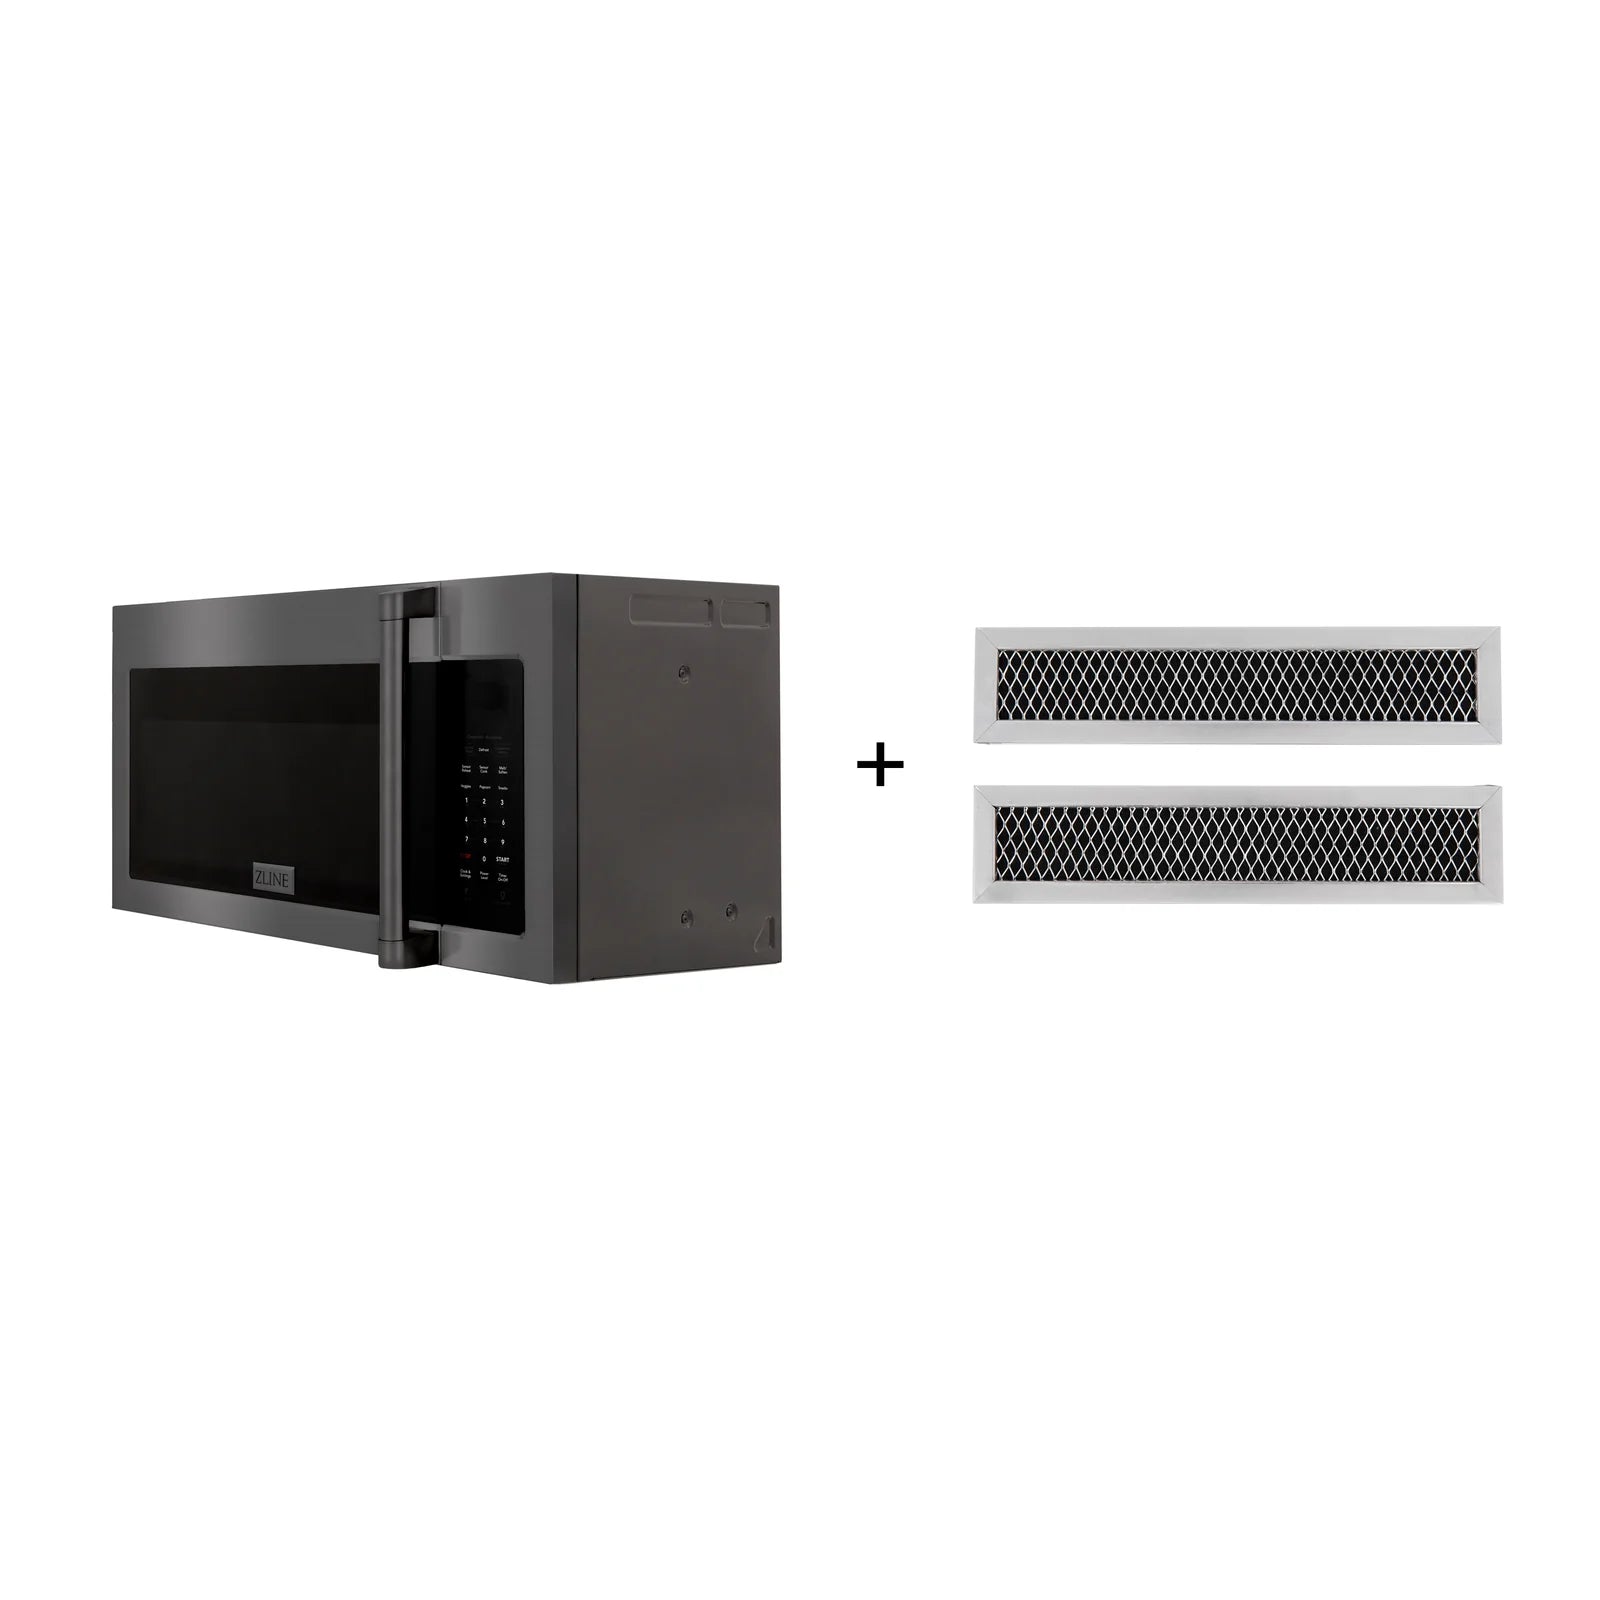 ZLINE 30-Inch 1.5 cu. ft. Over the Range Microwave in Black Stainless Steel with Traditional Handle and Set of 2 Charcoal Filters - MWO-OTRCFH-30-BS